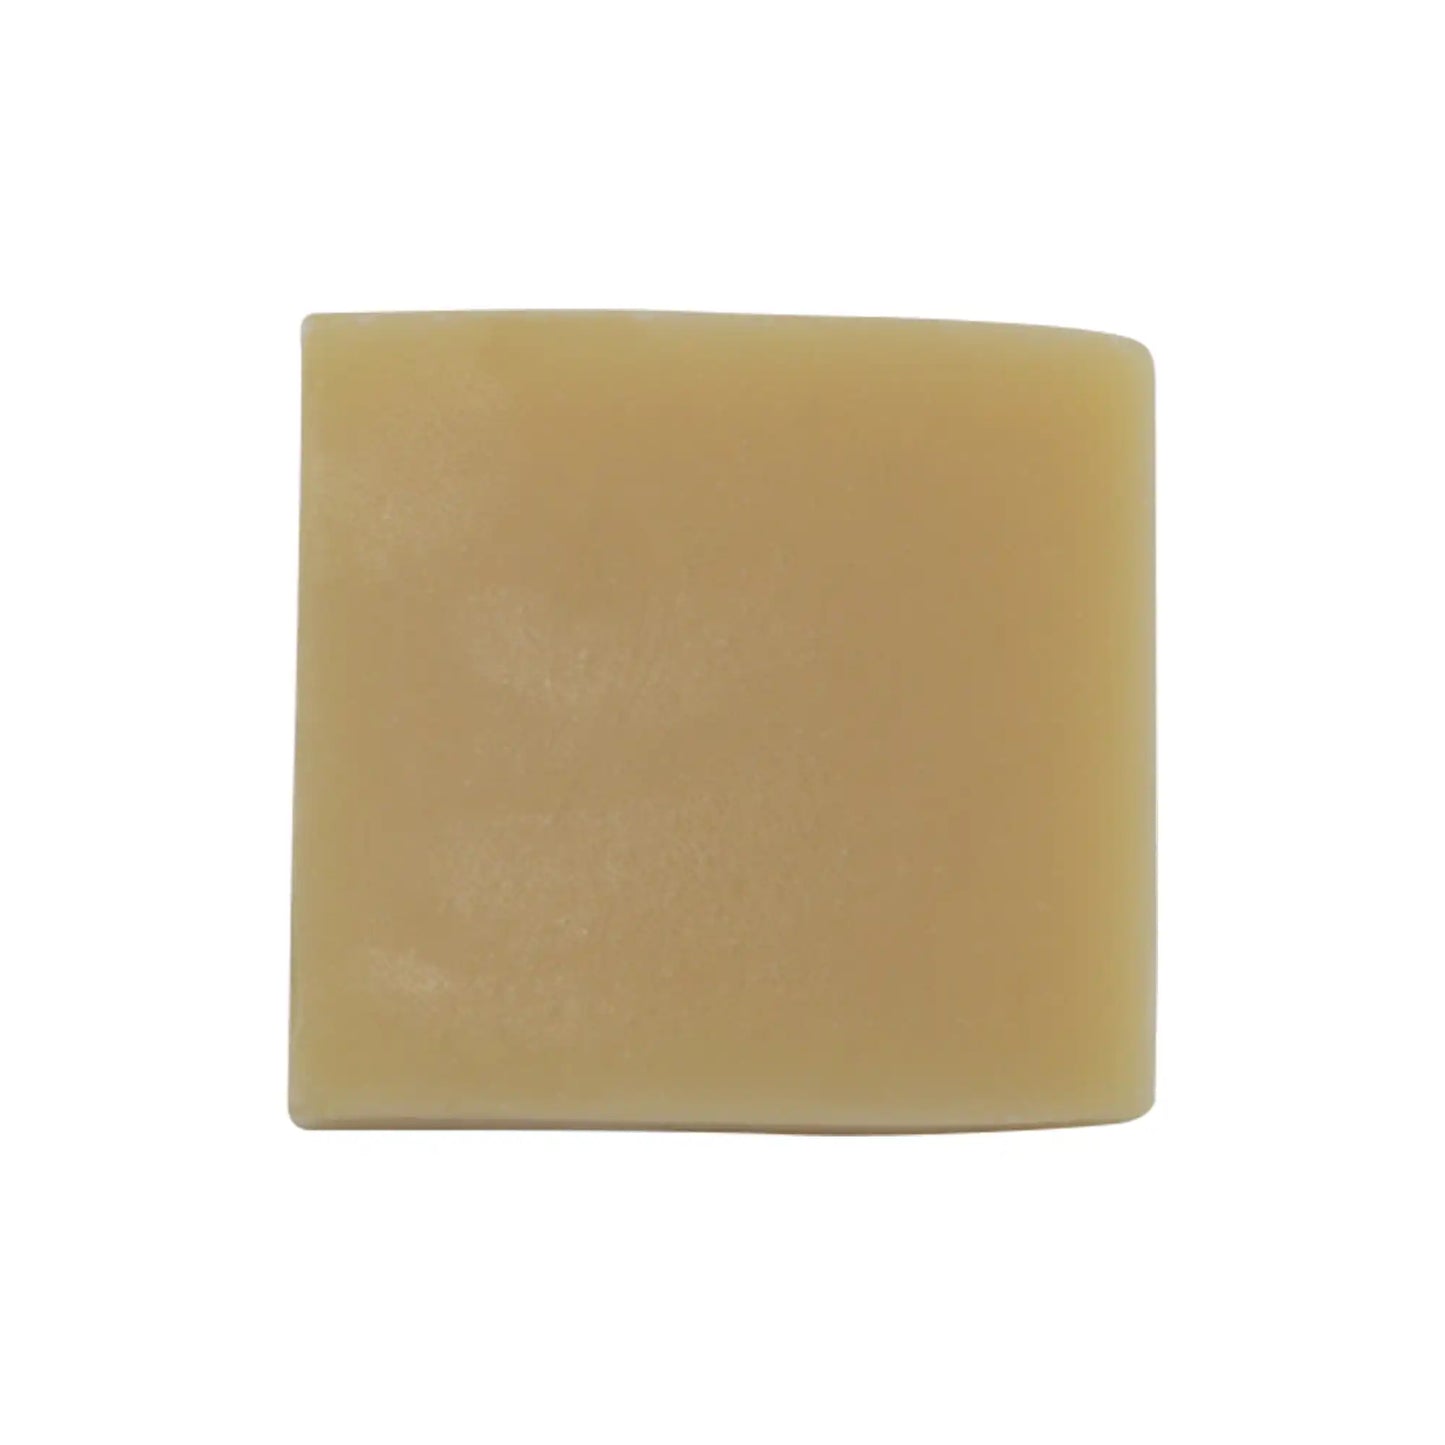 Cruisin Organics tea tree soap combines tea tree, eucalyptus, and lavender oils for a refreshing scent. Made with natural ingredients, this soap nourishes and revitalizes your skin without harmful chemicals. Indulge in luxurious, everyday use.